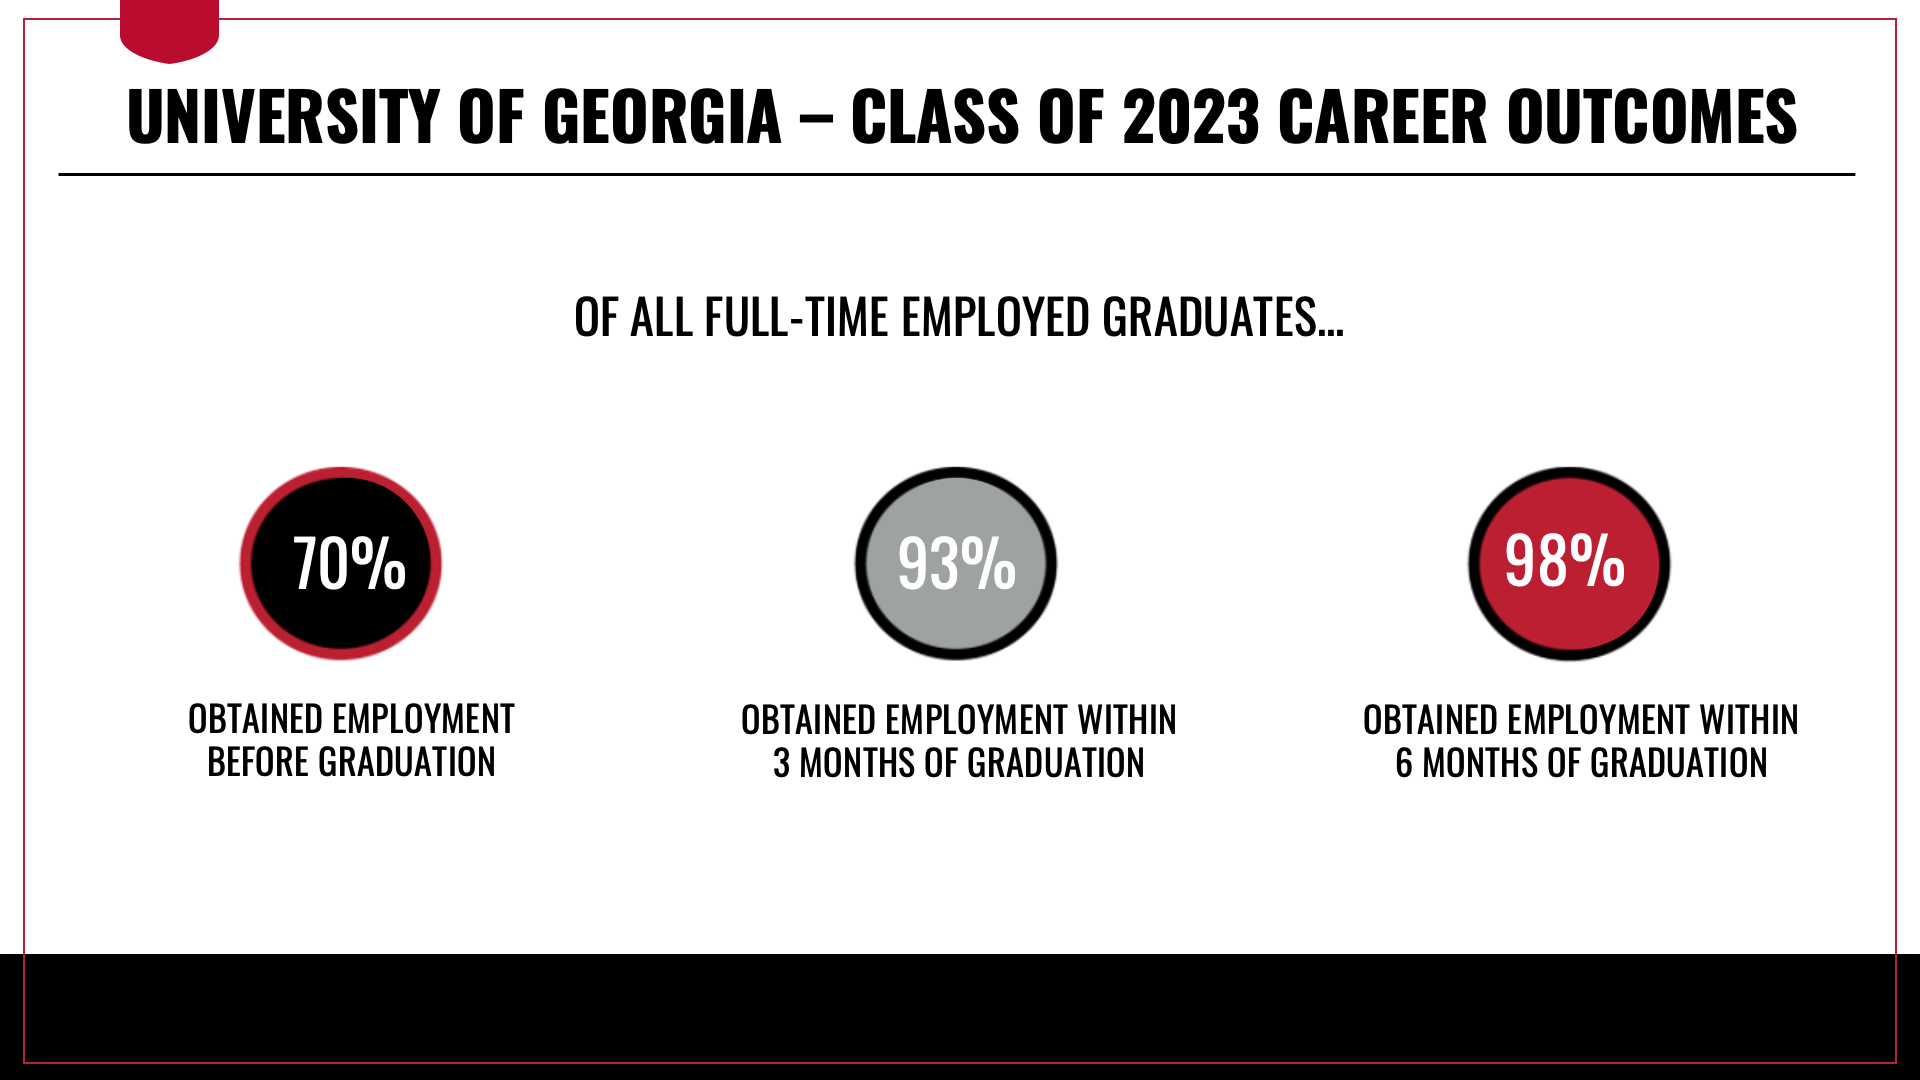 Of all full-time employed UGA Class of 2023 graduates, 70 percent obtained employment before graduation, 93 percent obtained employment within three months of graduation, and 98 percent obtained employment within six months of graduation